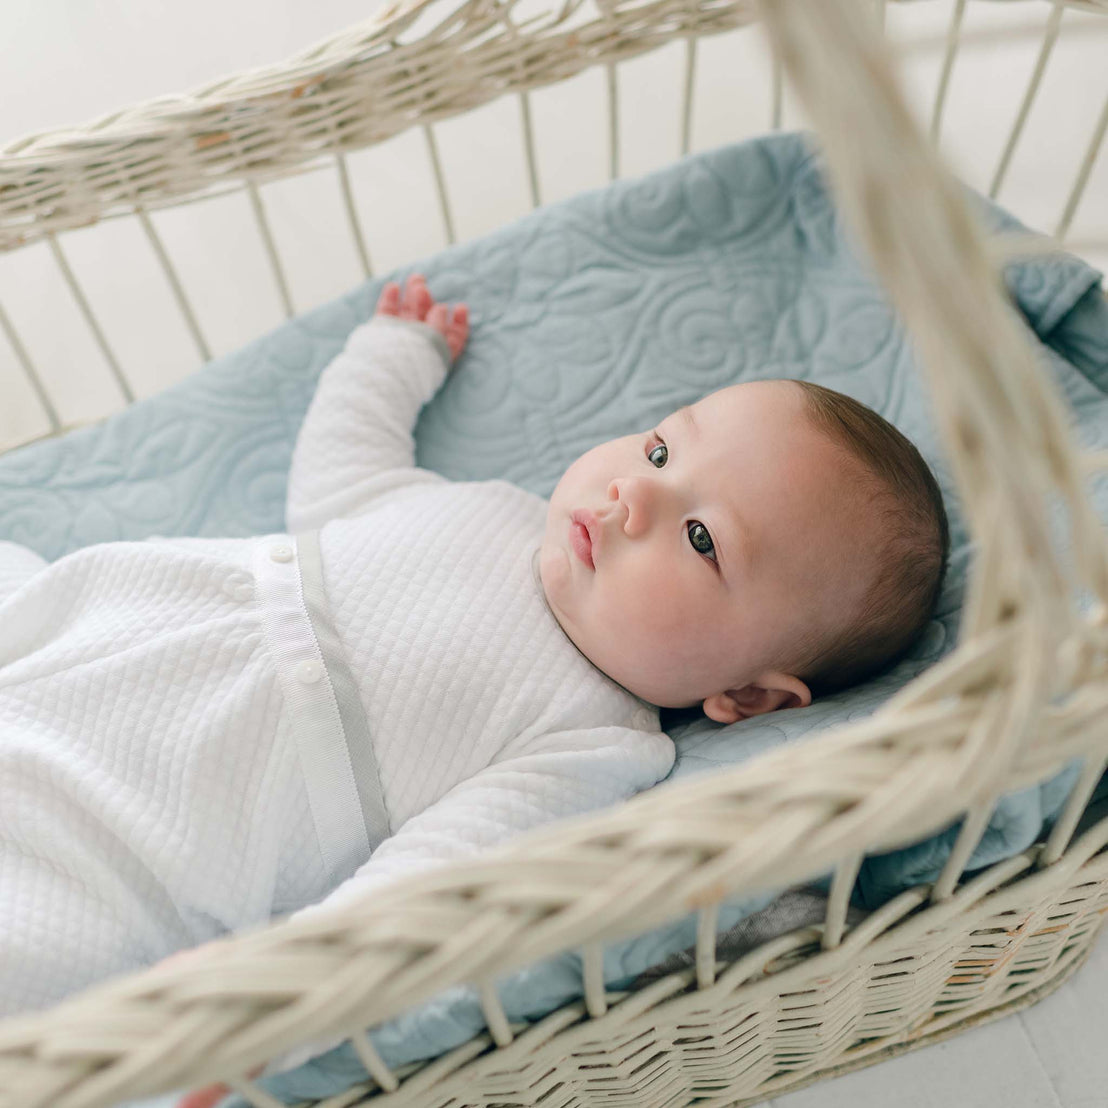 A baby dressed in a soft white Grayson Quilted Romper lies in a wicker bassinet with a blue quilted liner. The baby is looking attentively at something off-camera, with one arm resting outstretched. The setting appears calm and cozy.